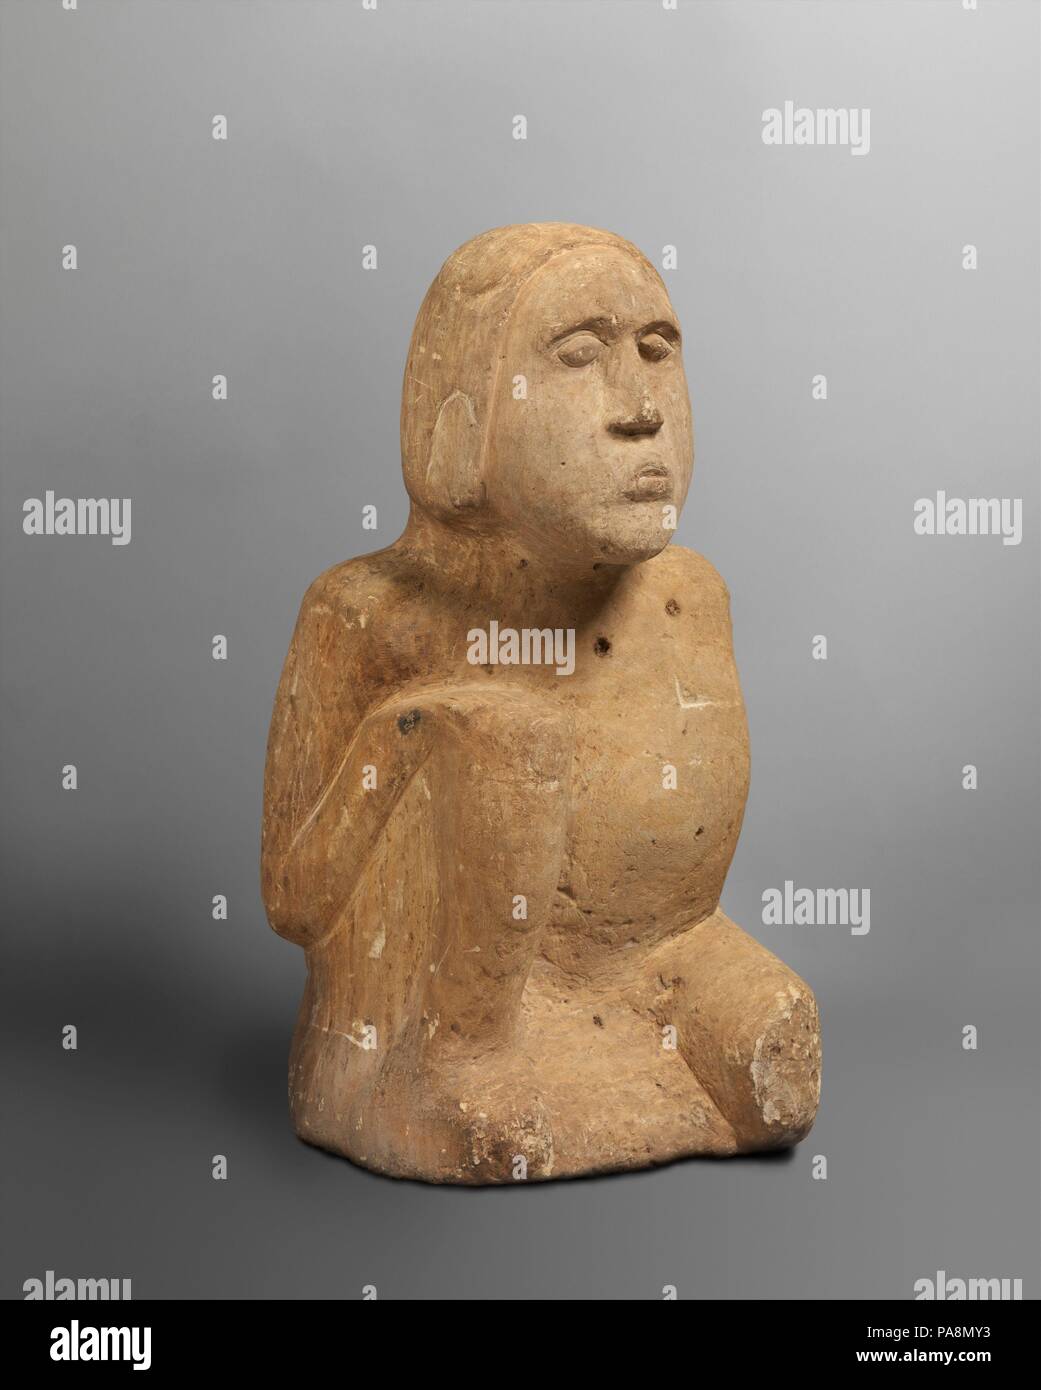 Mississippian Figure. Culture: Mississippian. Dimensions: H. 26 1/2 x W. 14 x D. 10 3/4 in. (67.3 x 35.6 x 27.3 cm)  Weight: 93 lbs.. Date: 13th-14th century.  This ancestral figure was one of a male-female pair when discovered in 1895 on the banks of the Duck River in Humphreys County, Tennessee. Such figures played important roles among the more complex Mississippian societies of the Southeast during later precolonial times, when they were the focus of ancestor cults. The figures, primarily but not exclusively male, were placed and venerated in shrine houses together with the bones of signif Stock Photo